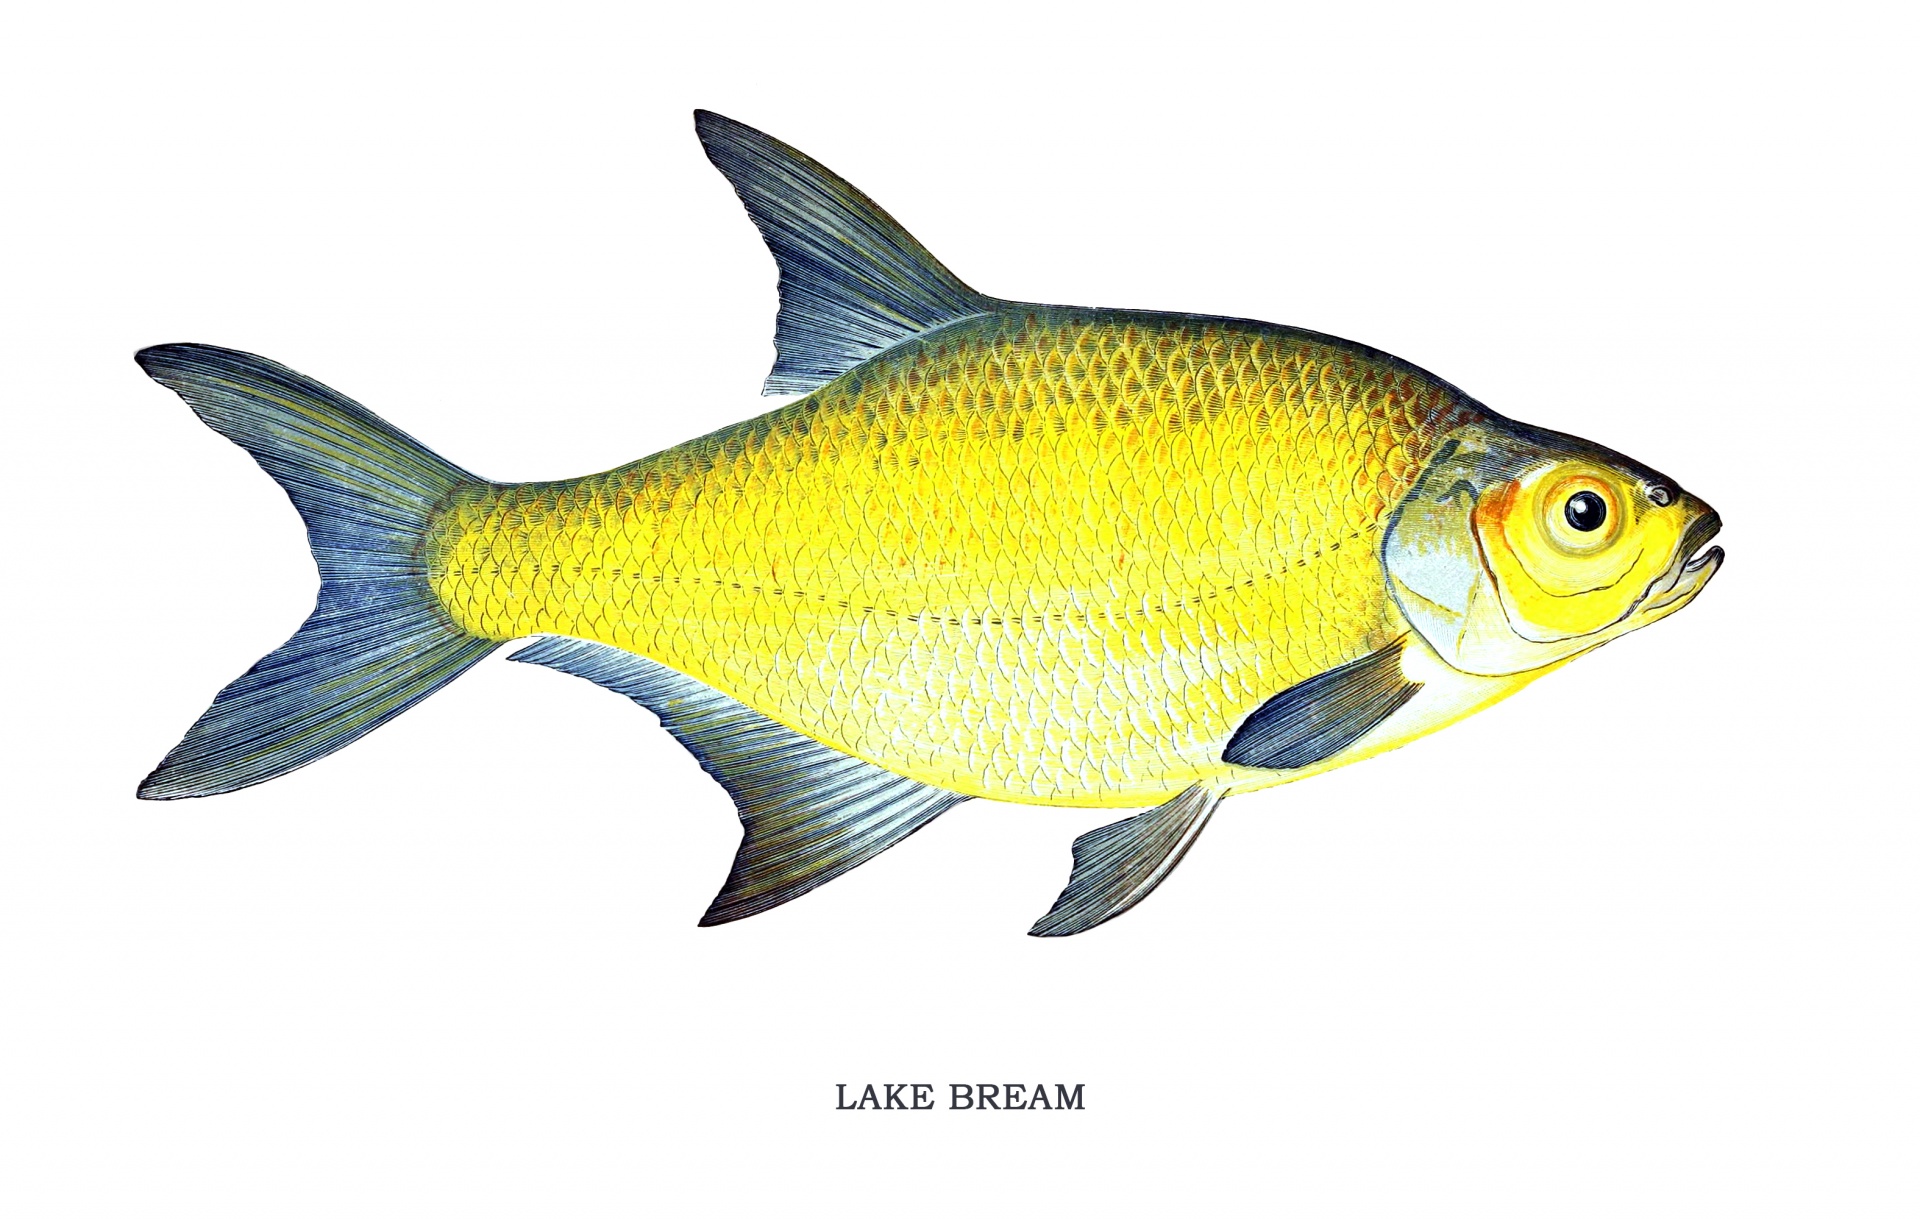 Vintage print of a lake bream fish on white background